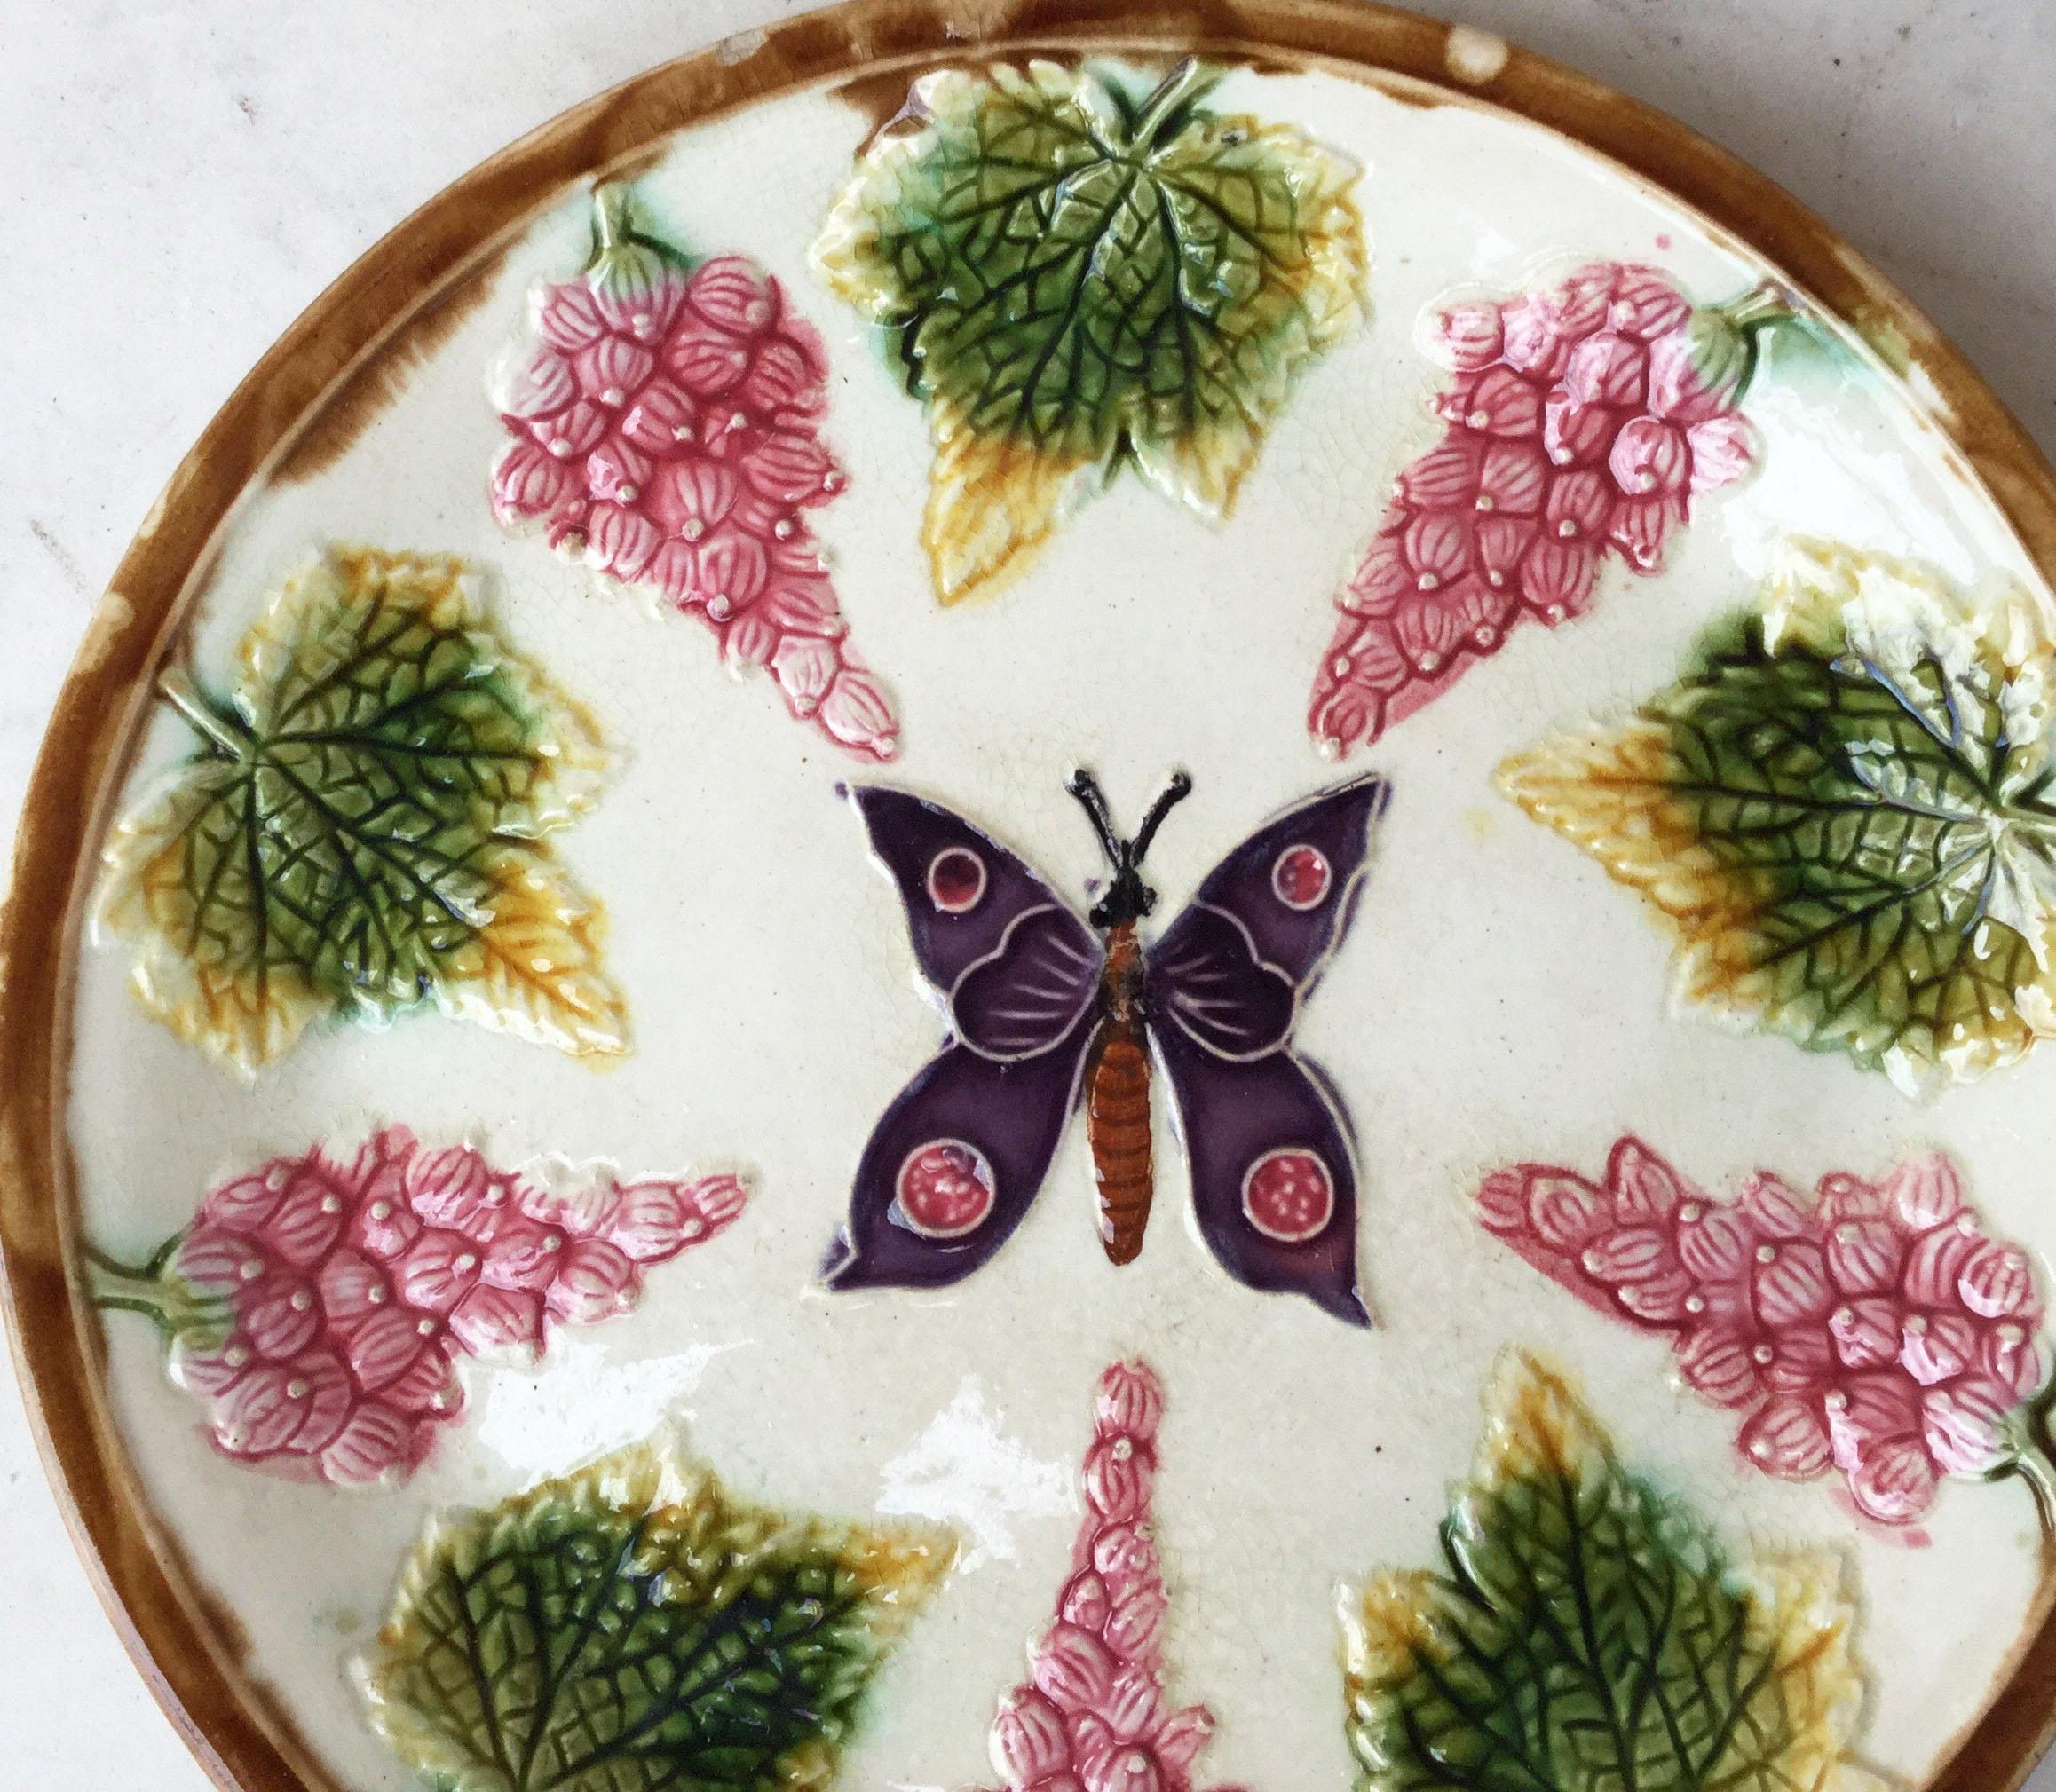 French Majolica plate with a purple butterfly on the center surrounded by fruits, circa 1890.